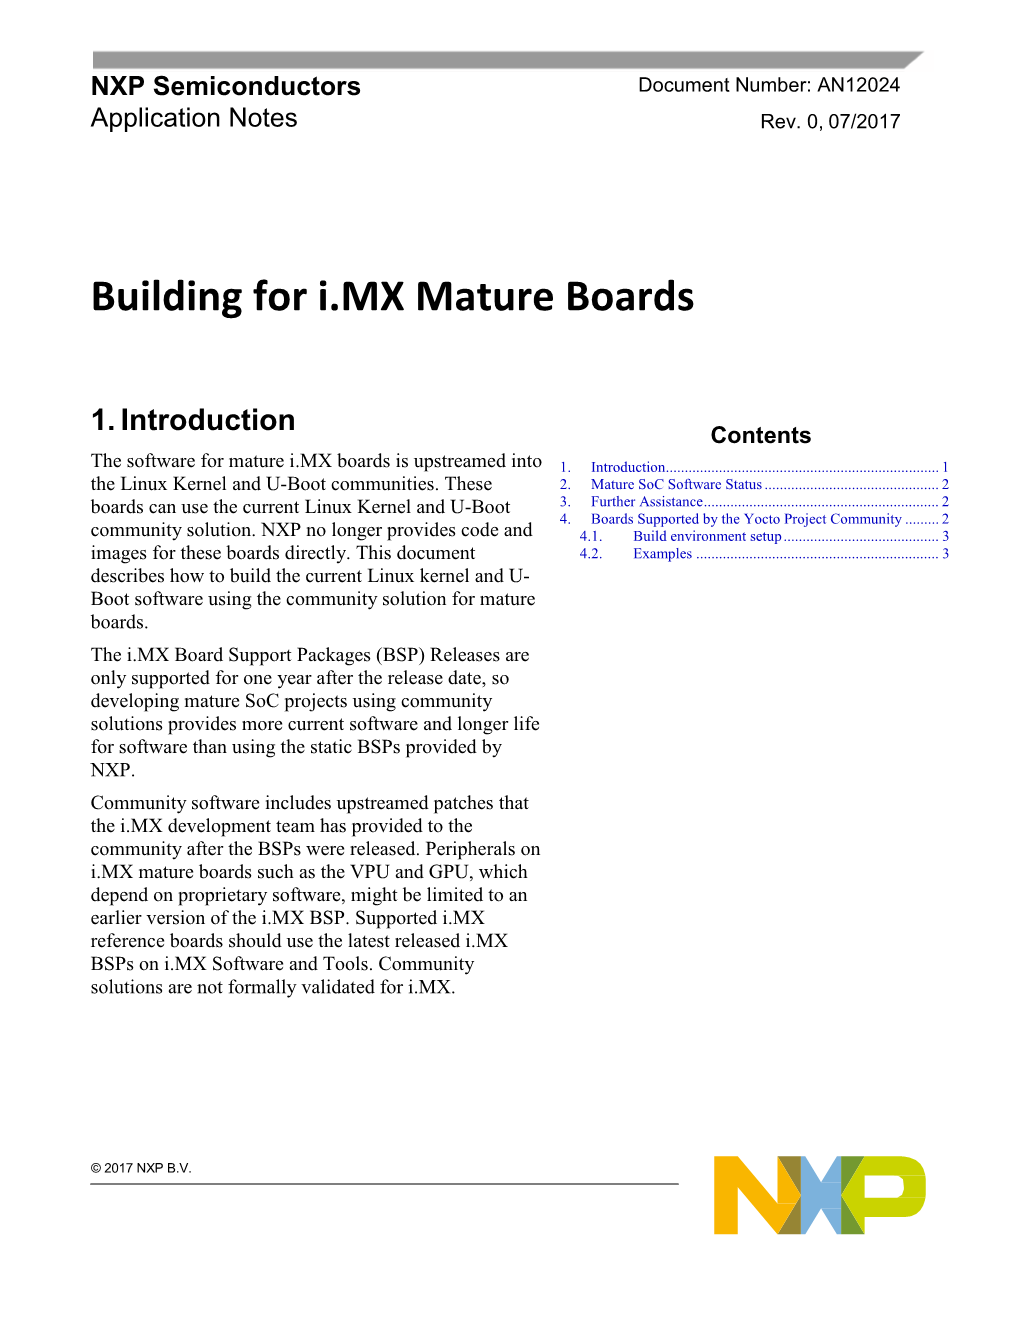 Building for I.MX Mature Boards